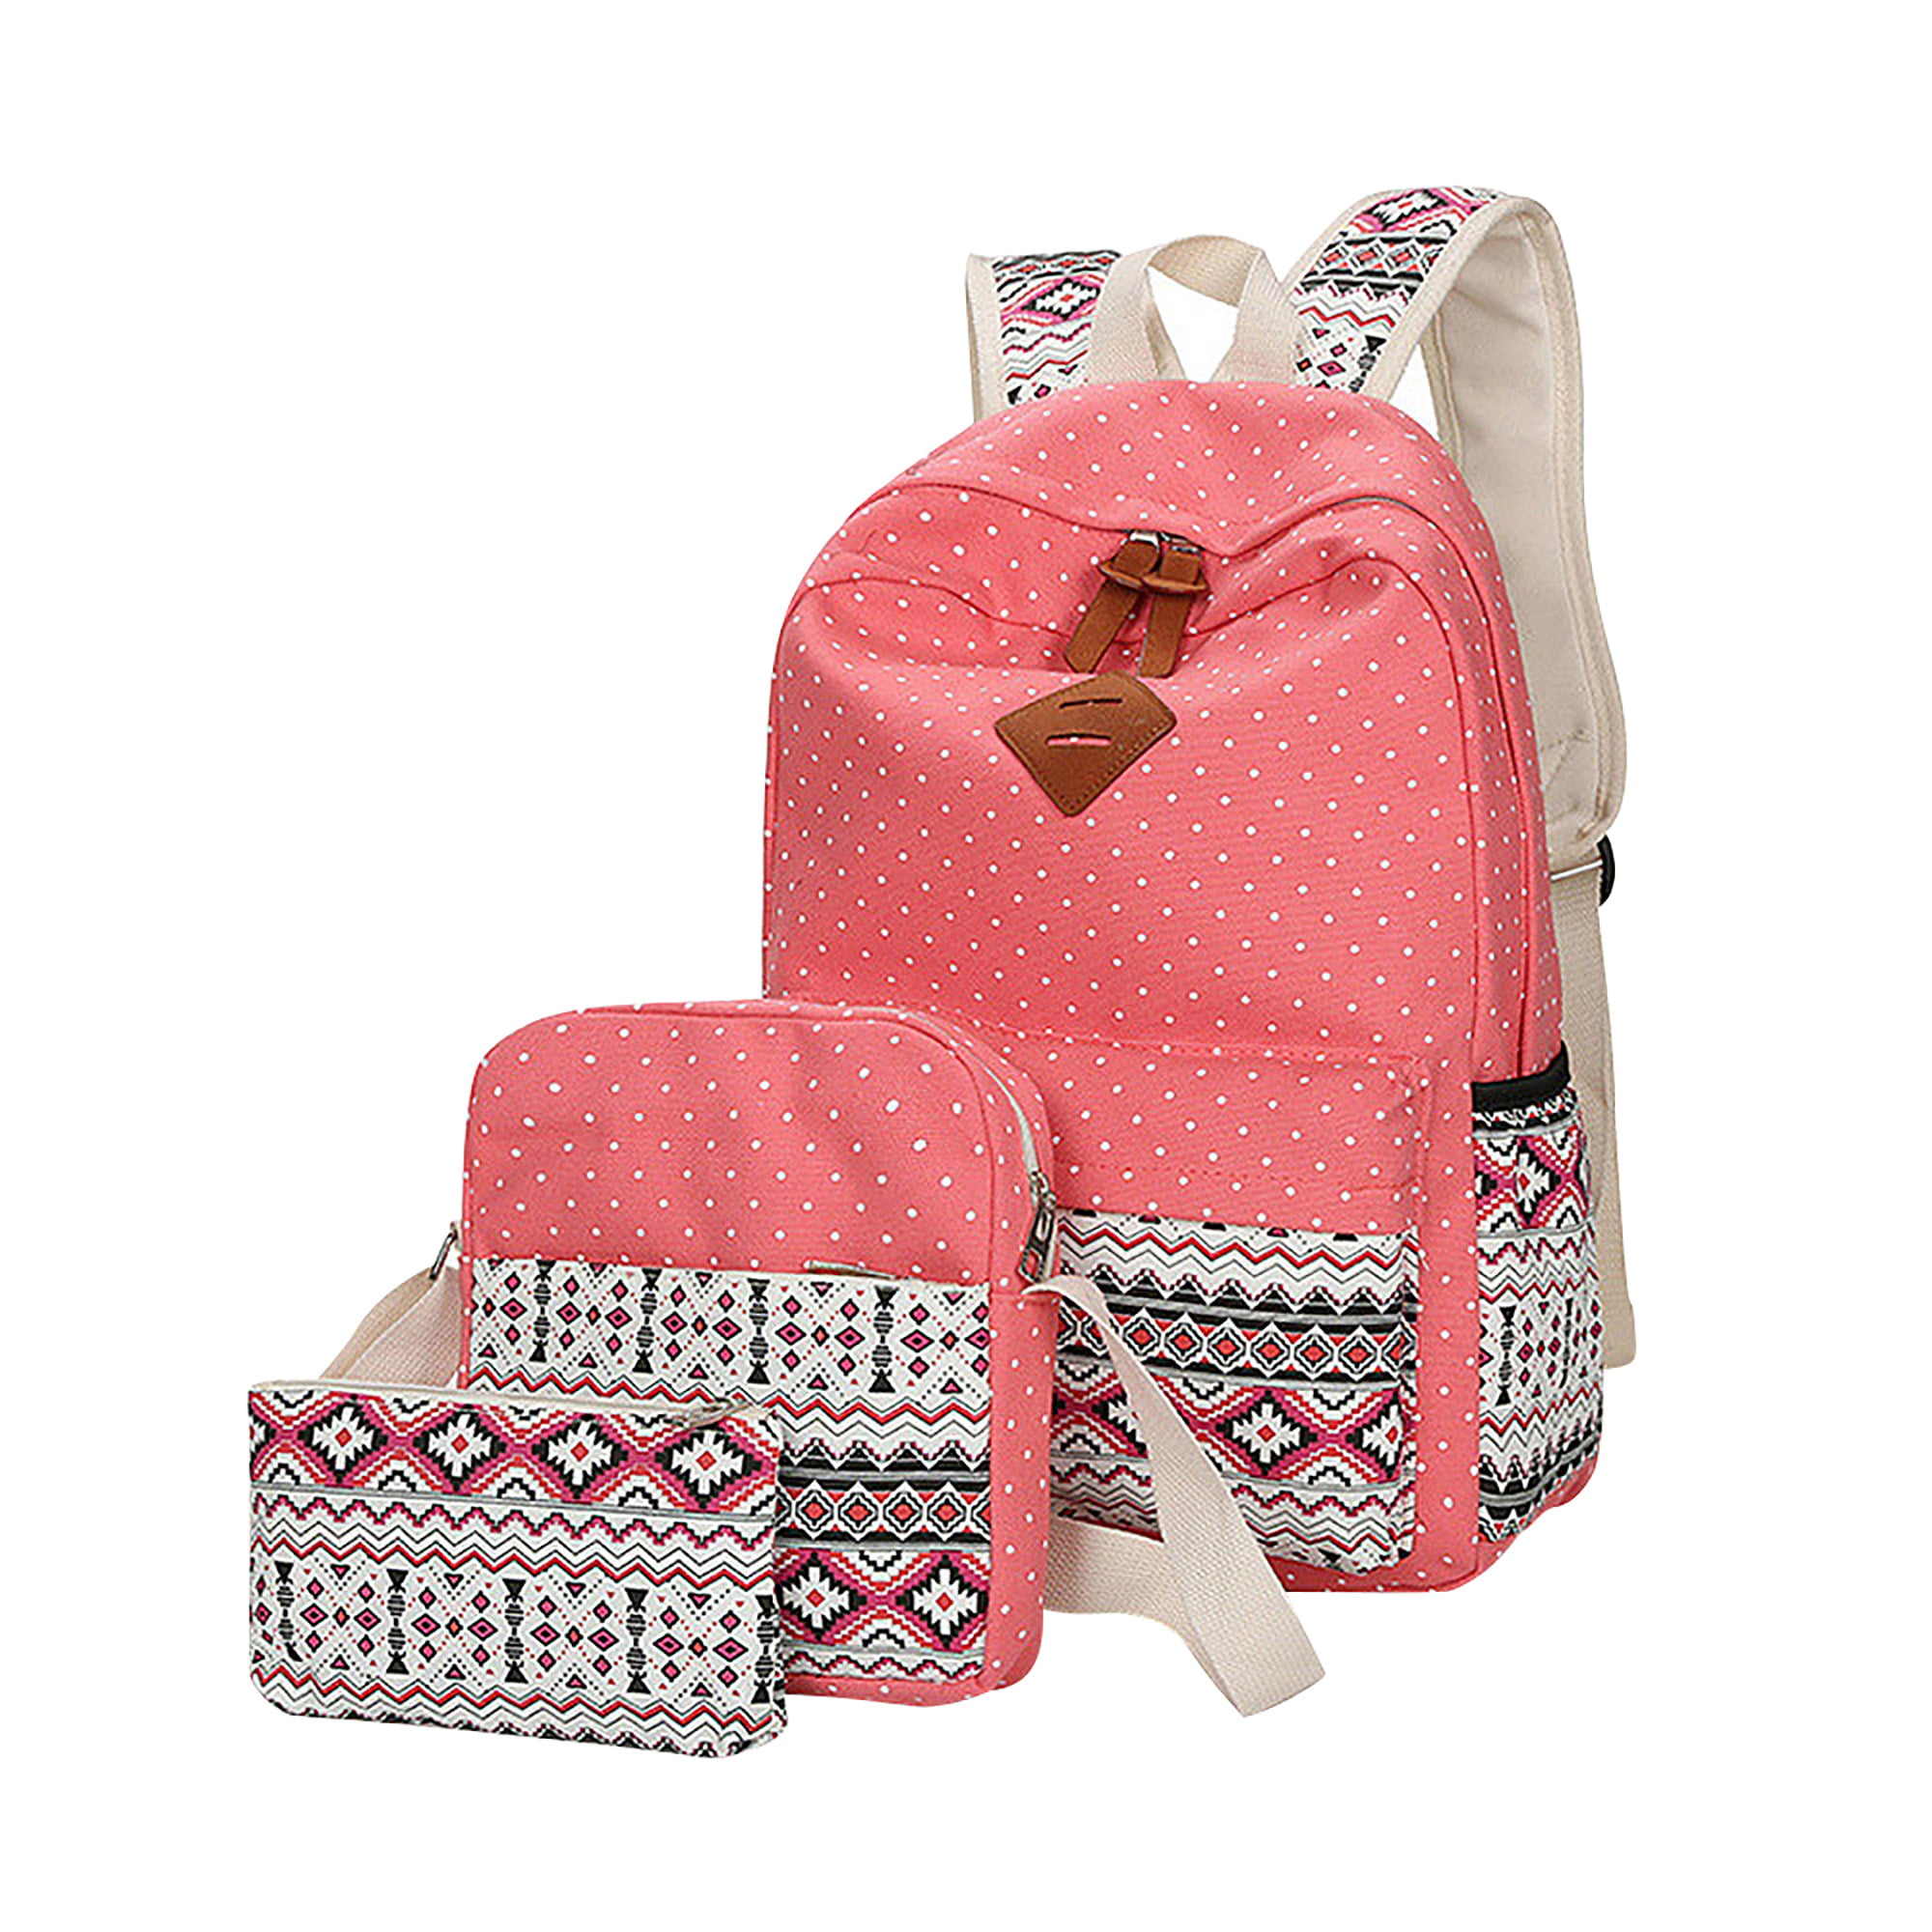 Lowestbest Elementary School Backpack For Women Fashion Canvas